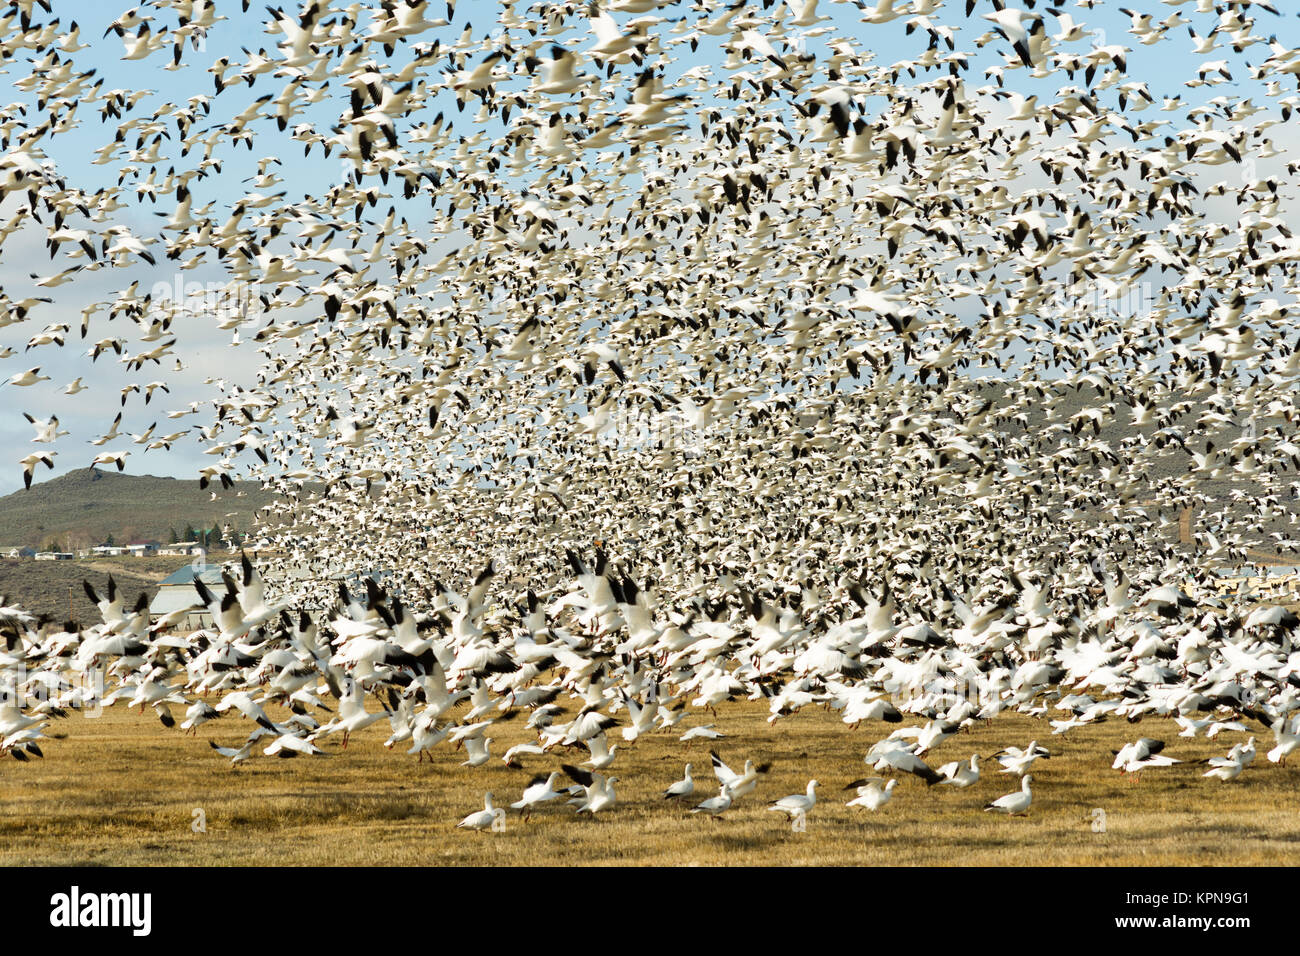 Snow Geese Flock Together Spring Migration Wild Birds Stock Photo